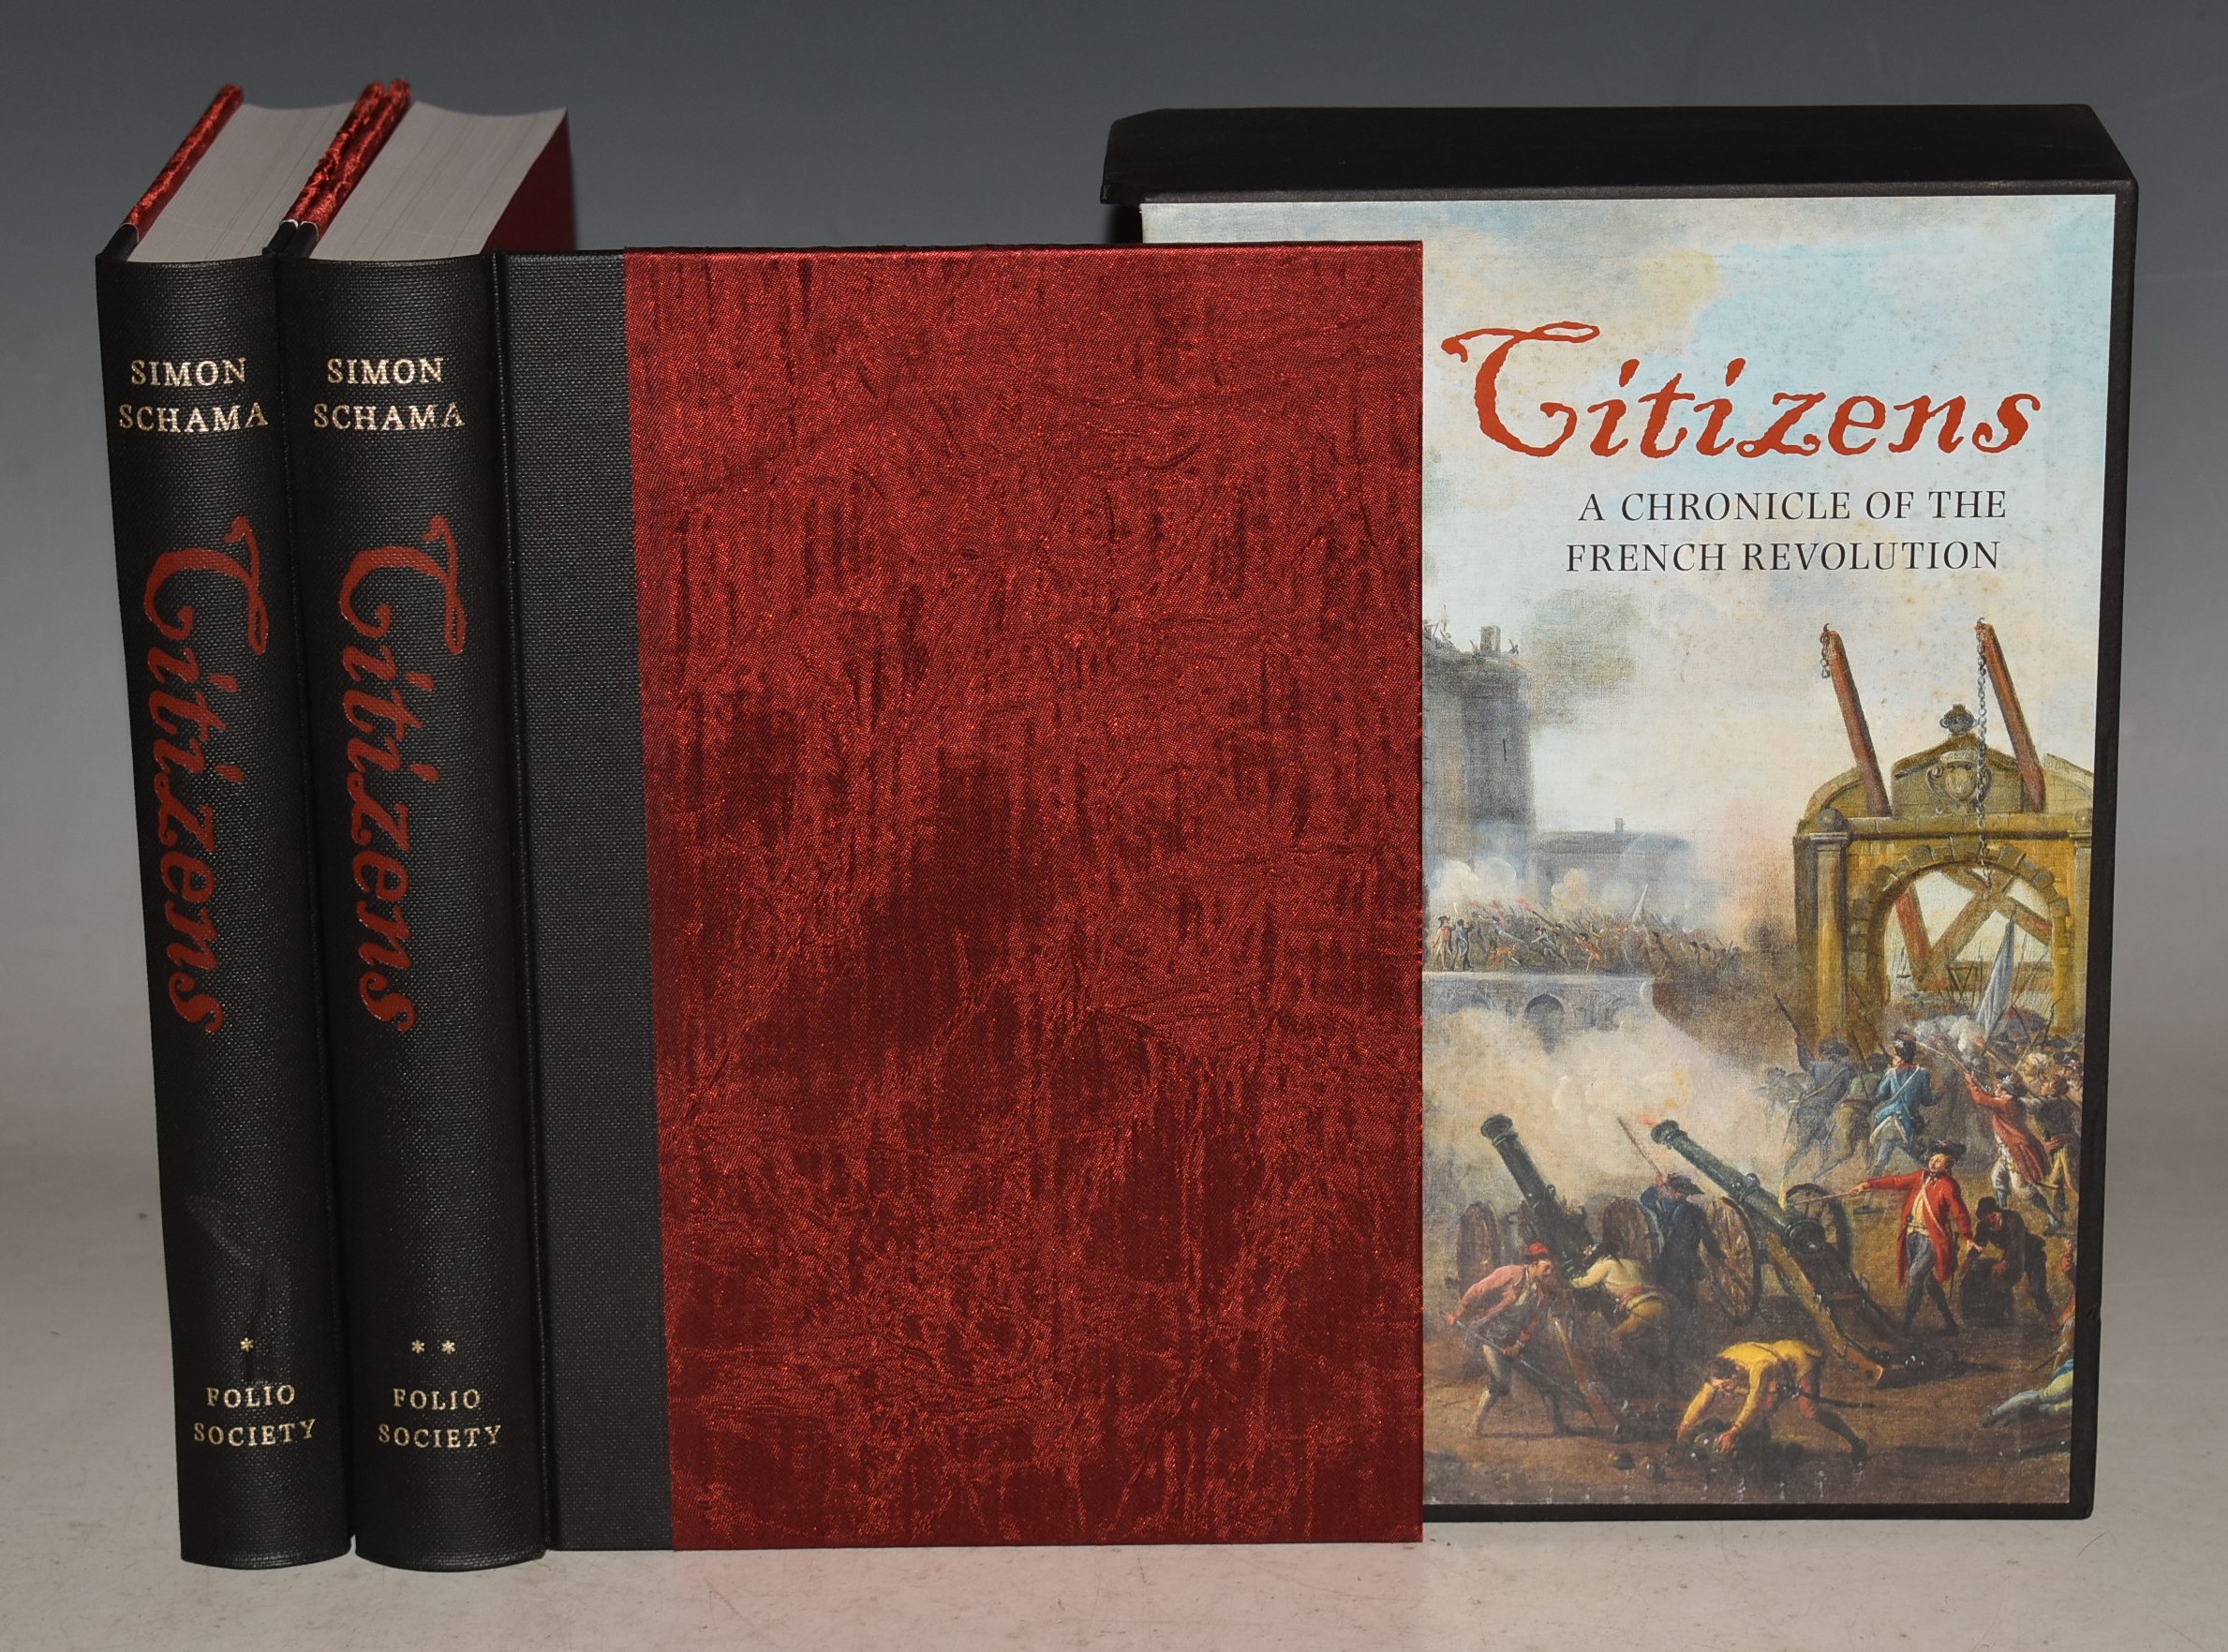 Volumes　Citizens　the　A　Two　Chronicle　of　French　Revolution.　in　Slipcase.